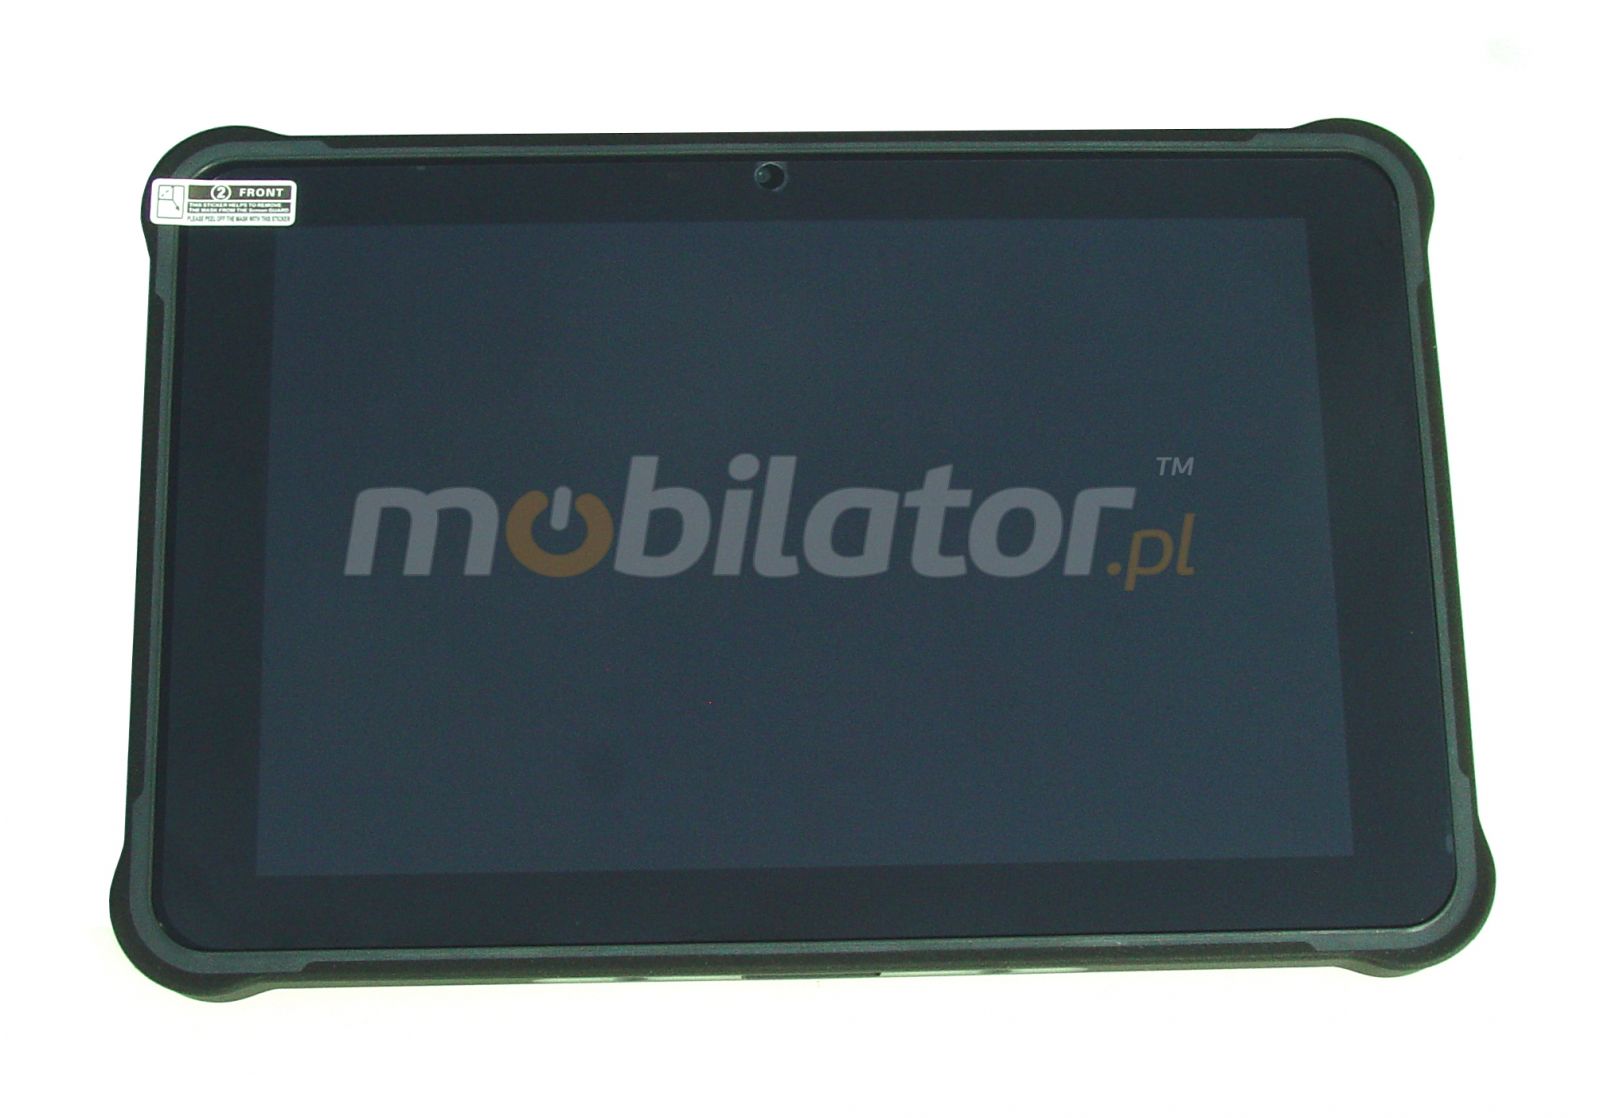 MobiPad Cool A311L v.4.1 - 3 Years Warranty - armored, industrial, splash-proof with IP65 standard - UHF RFID and 2D, NFC, 4G scanner 